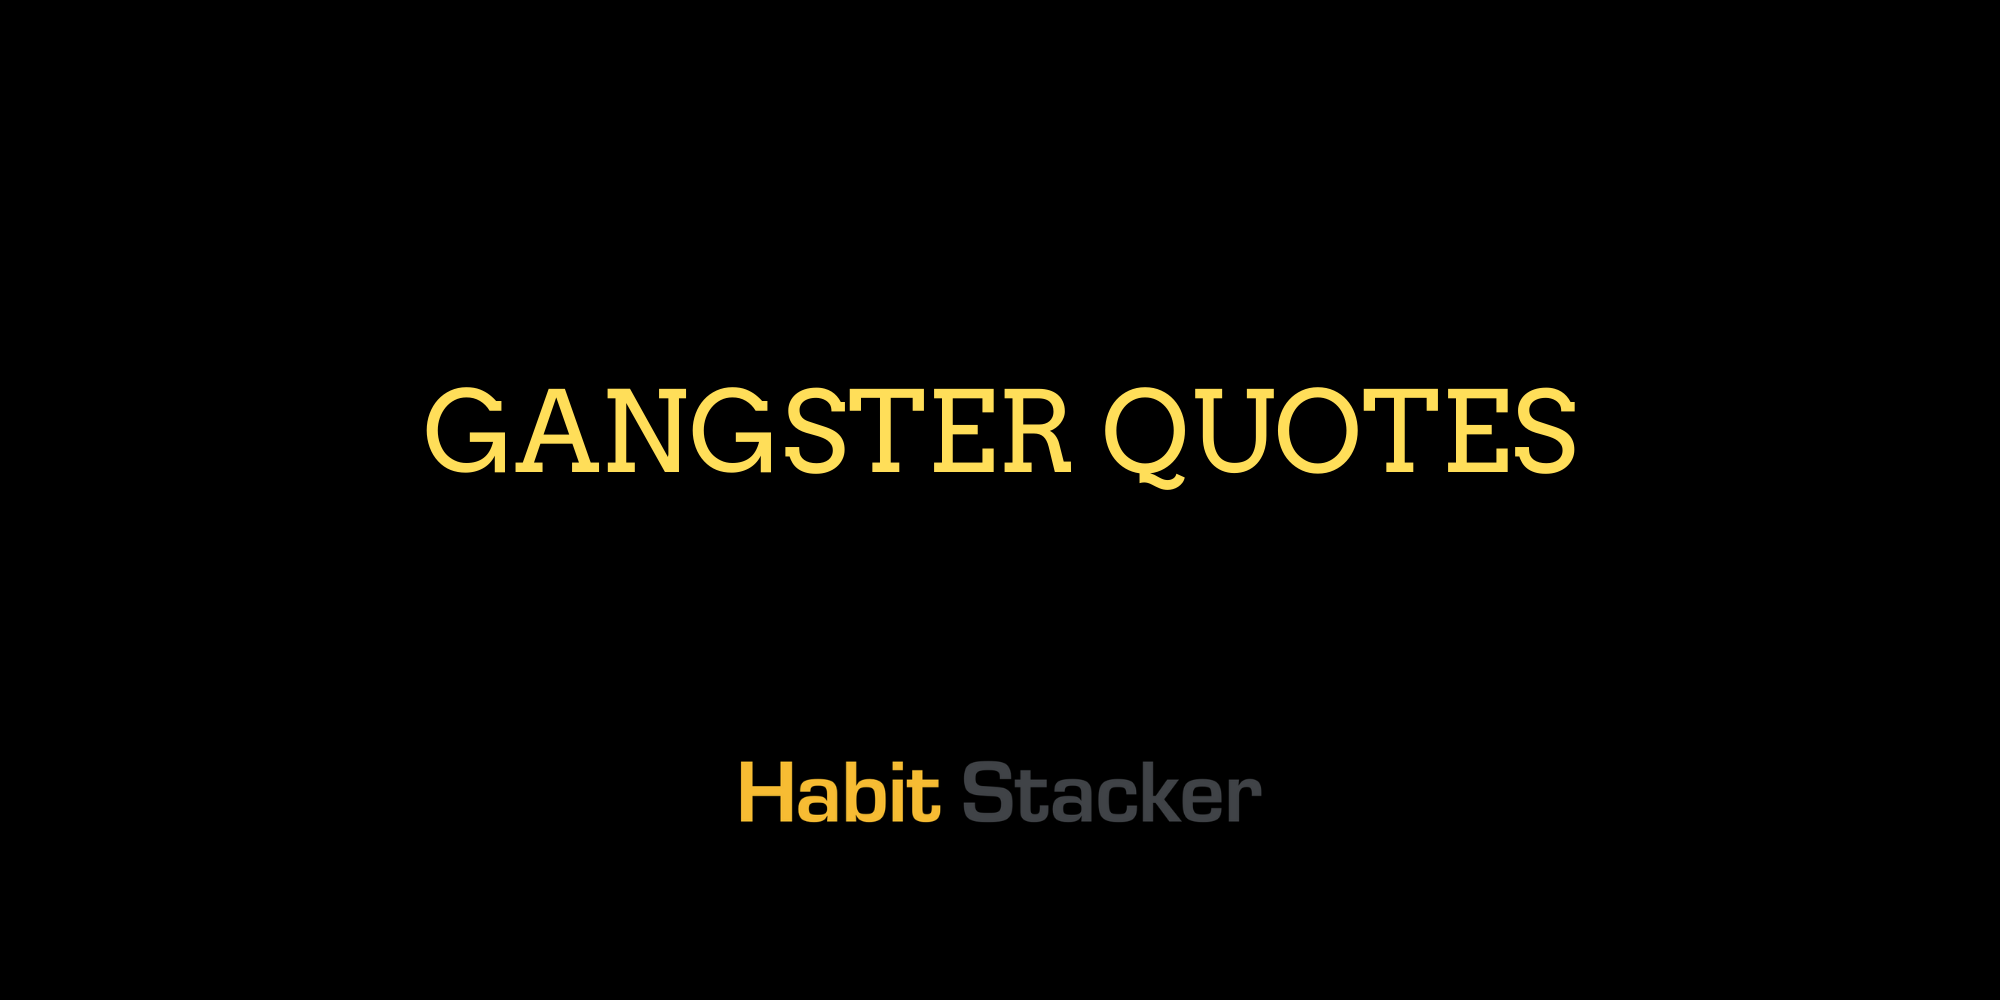 41 Gangster Quotes - Habit Stacker